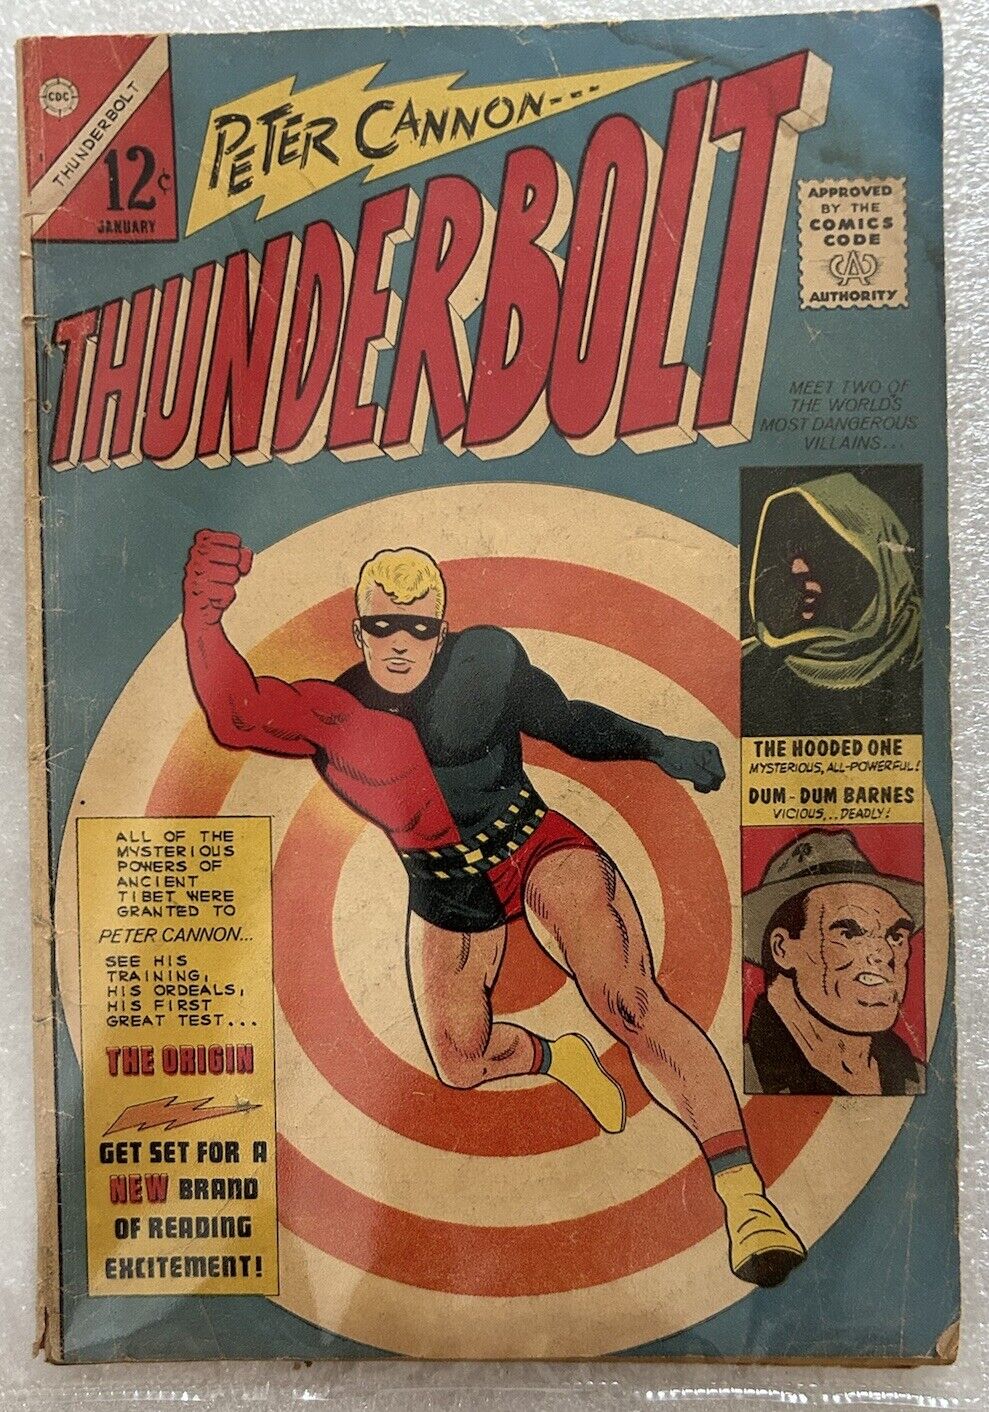 Peter Cannon Thunderbolt Comic Volume 1 Number 1, January 1966